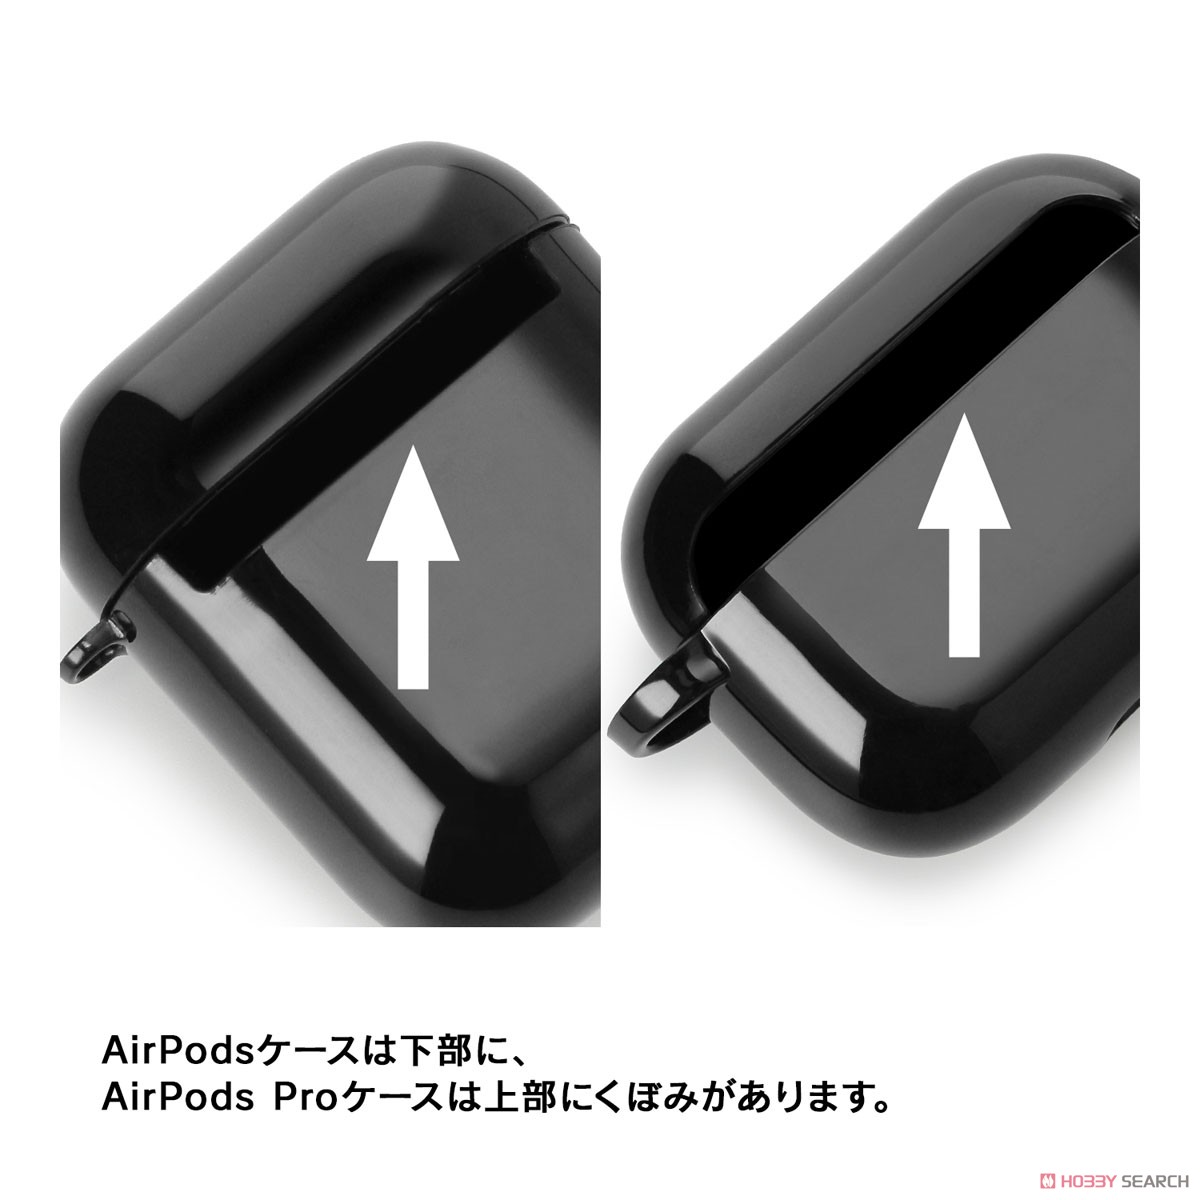 TVアニメ「最遊記RELOAD -ZEROIN-」 猪八戒 AirPodsケース(対応機種/AirPods) (キャラクターグッズ) その他の画像4